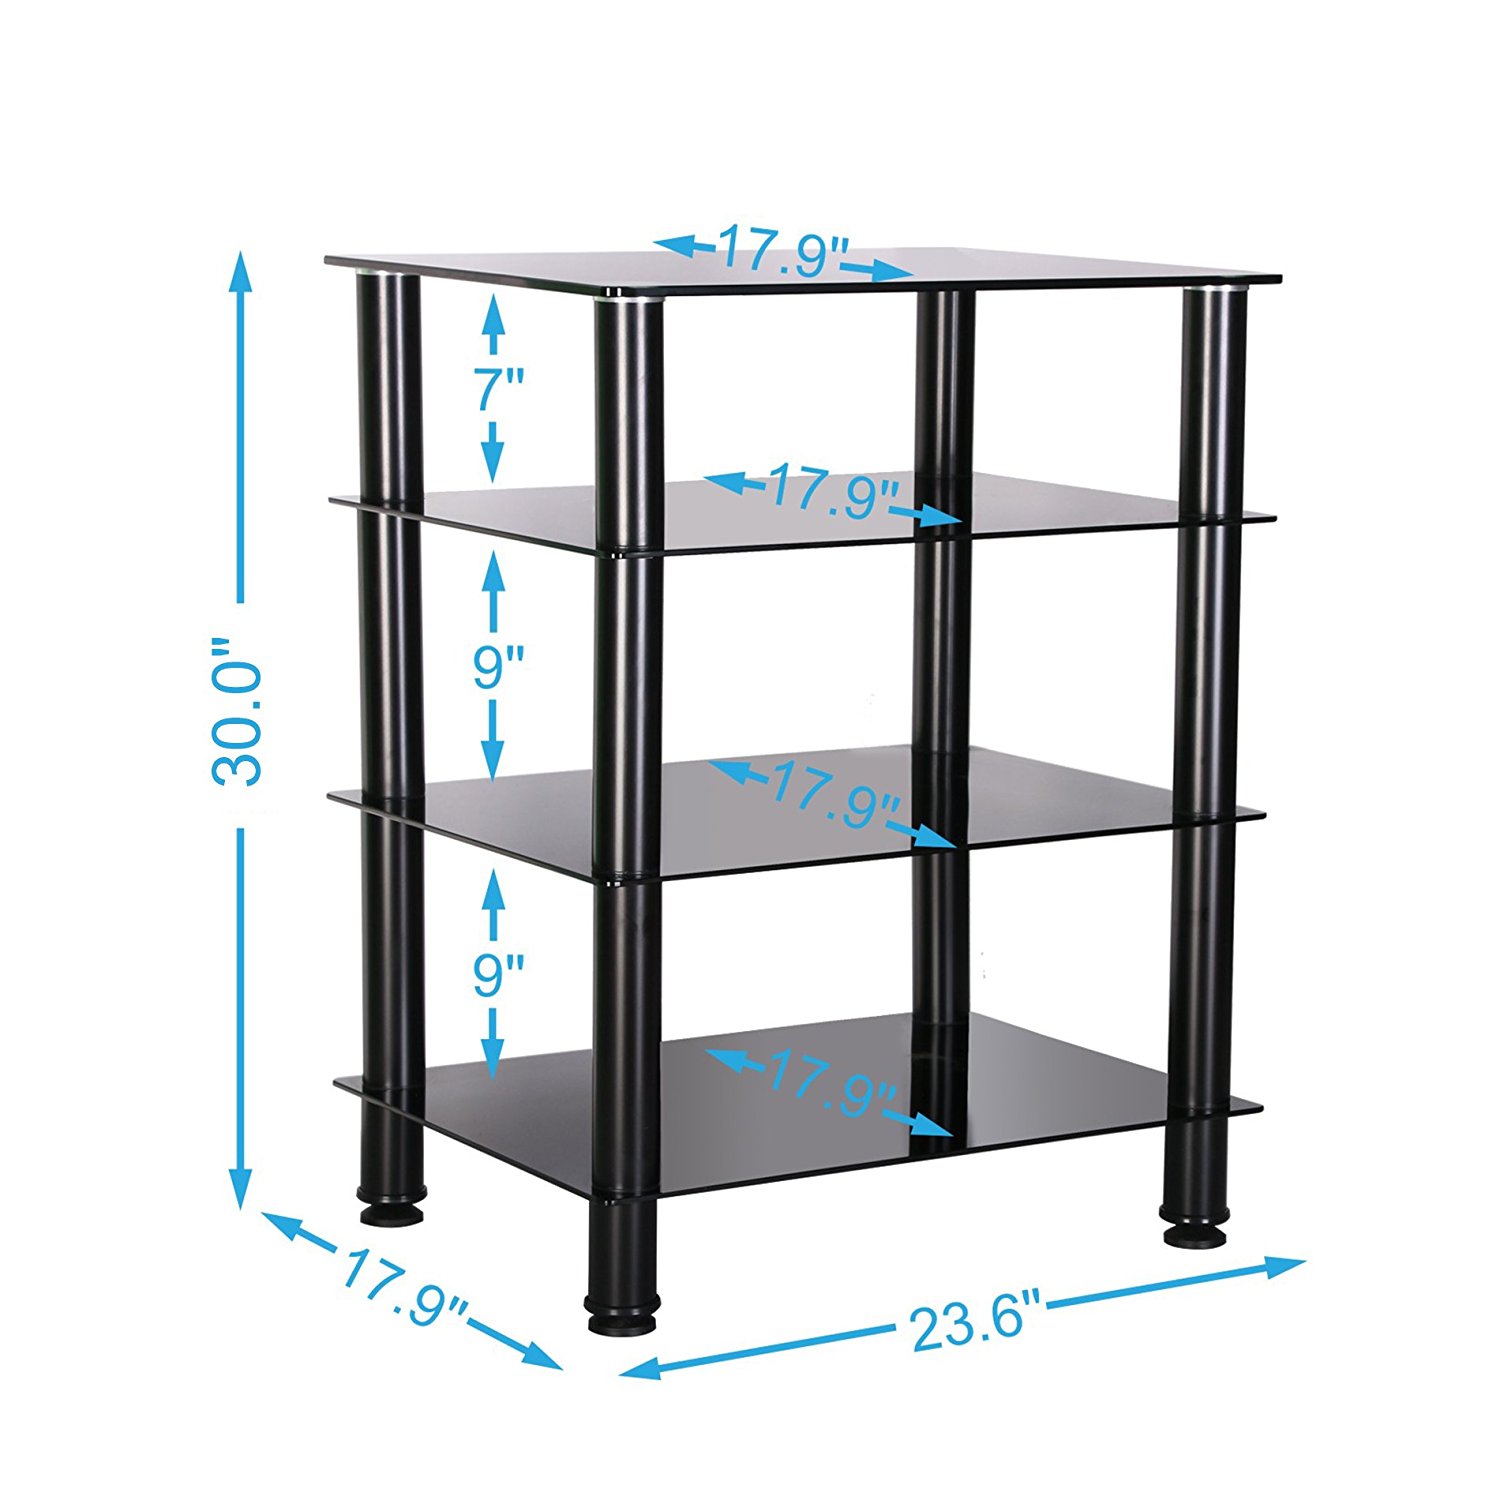 FITUEYES AV shelf Media Component TV Stand Audio Cabinet with Glass Shelf 4-tier F1AS406001GB - image 4 of 5